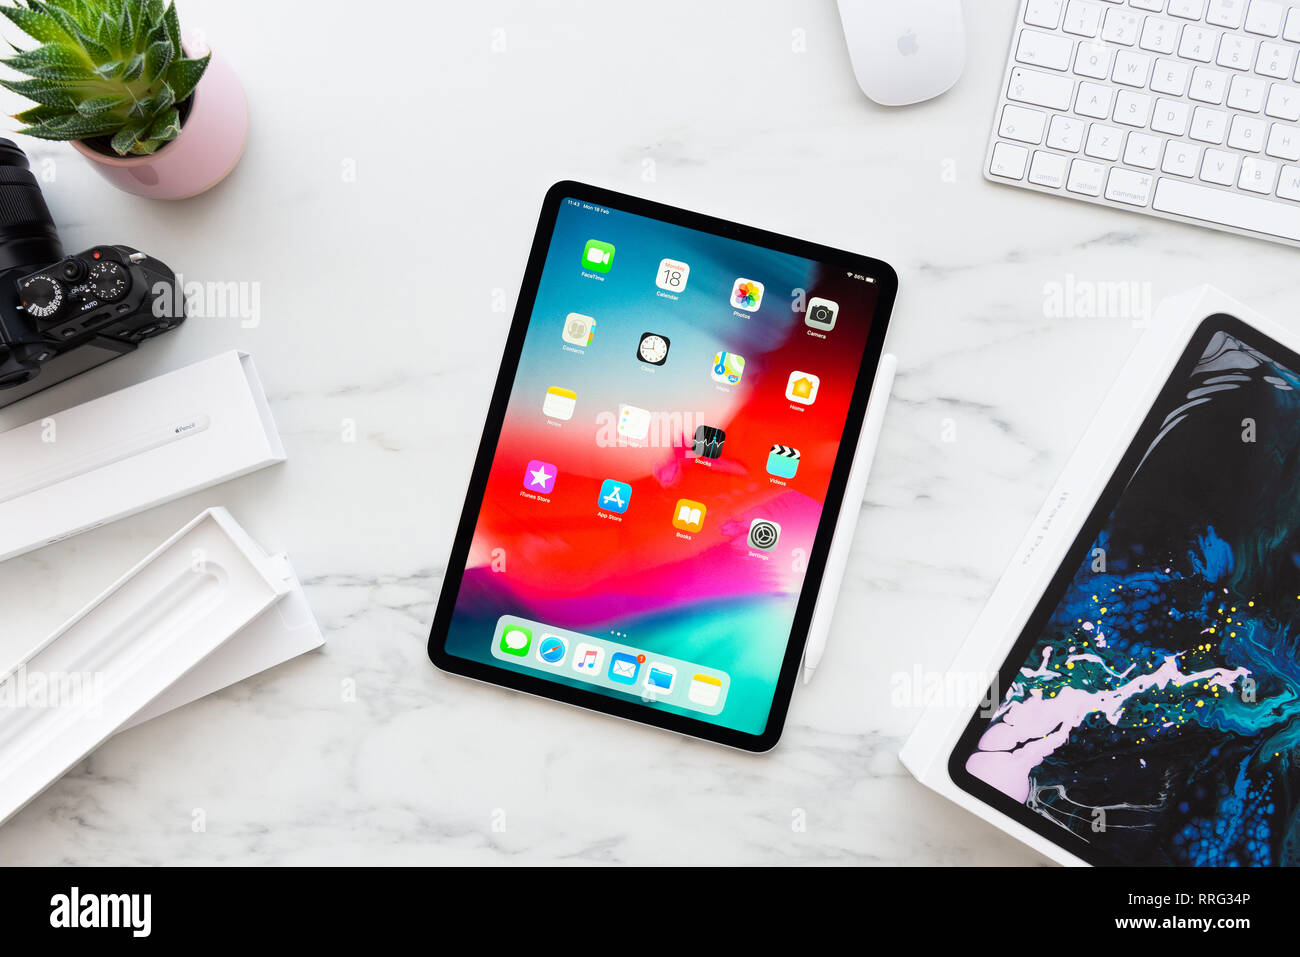 ZAGREB, CROATIA - FEBRUARY 18, 2019: Apple iPad Pro 11 inch with Apple Pencil 2 on white marble background. Newly opened iPad Pro 11 inch and Apple Pe Stock Photo